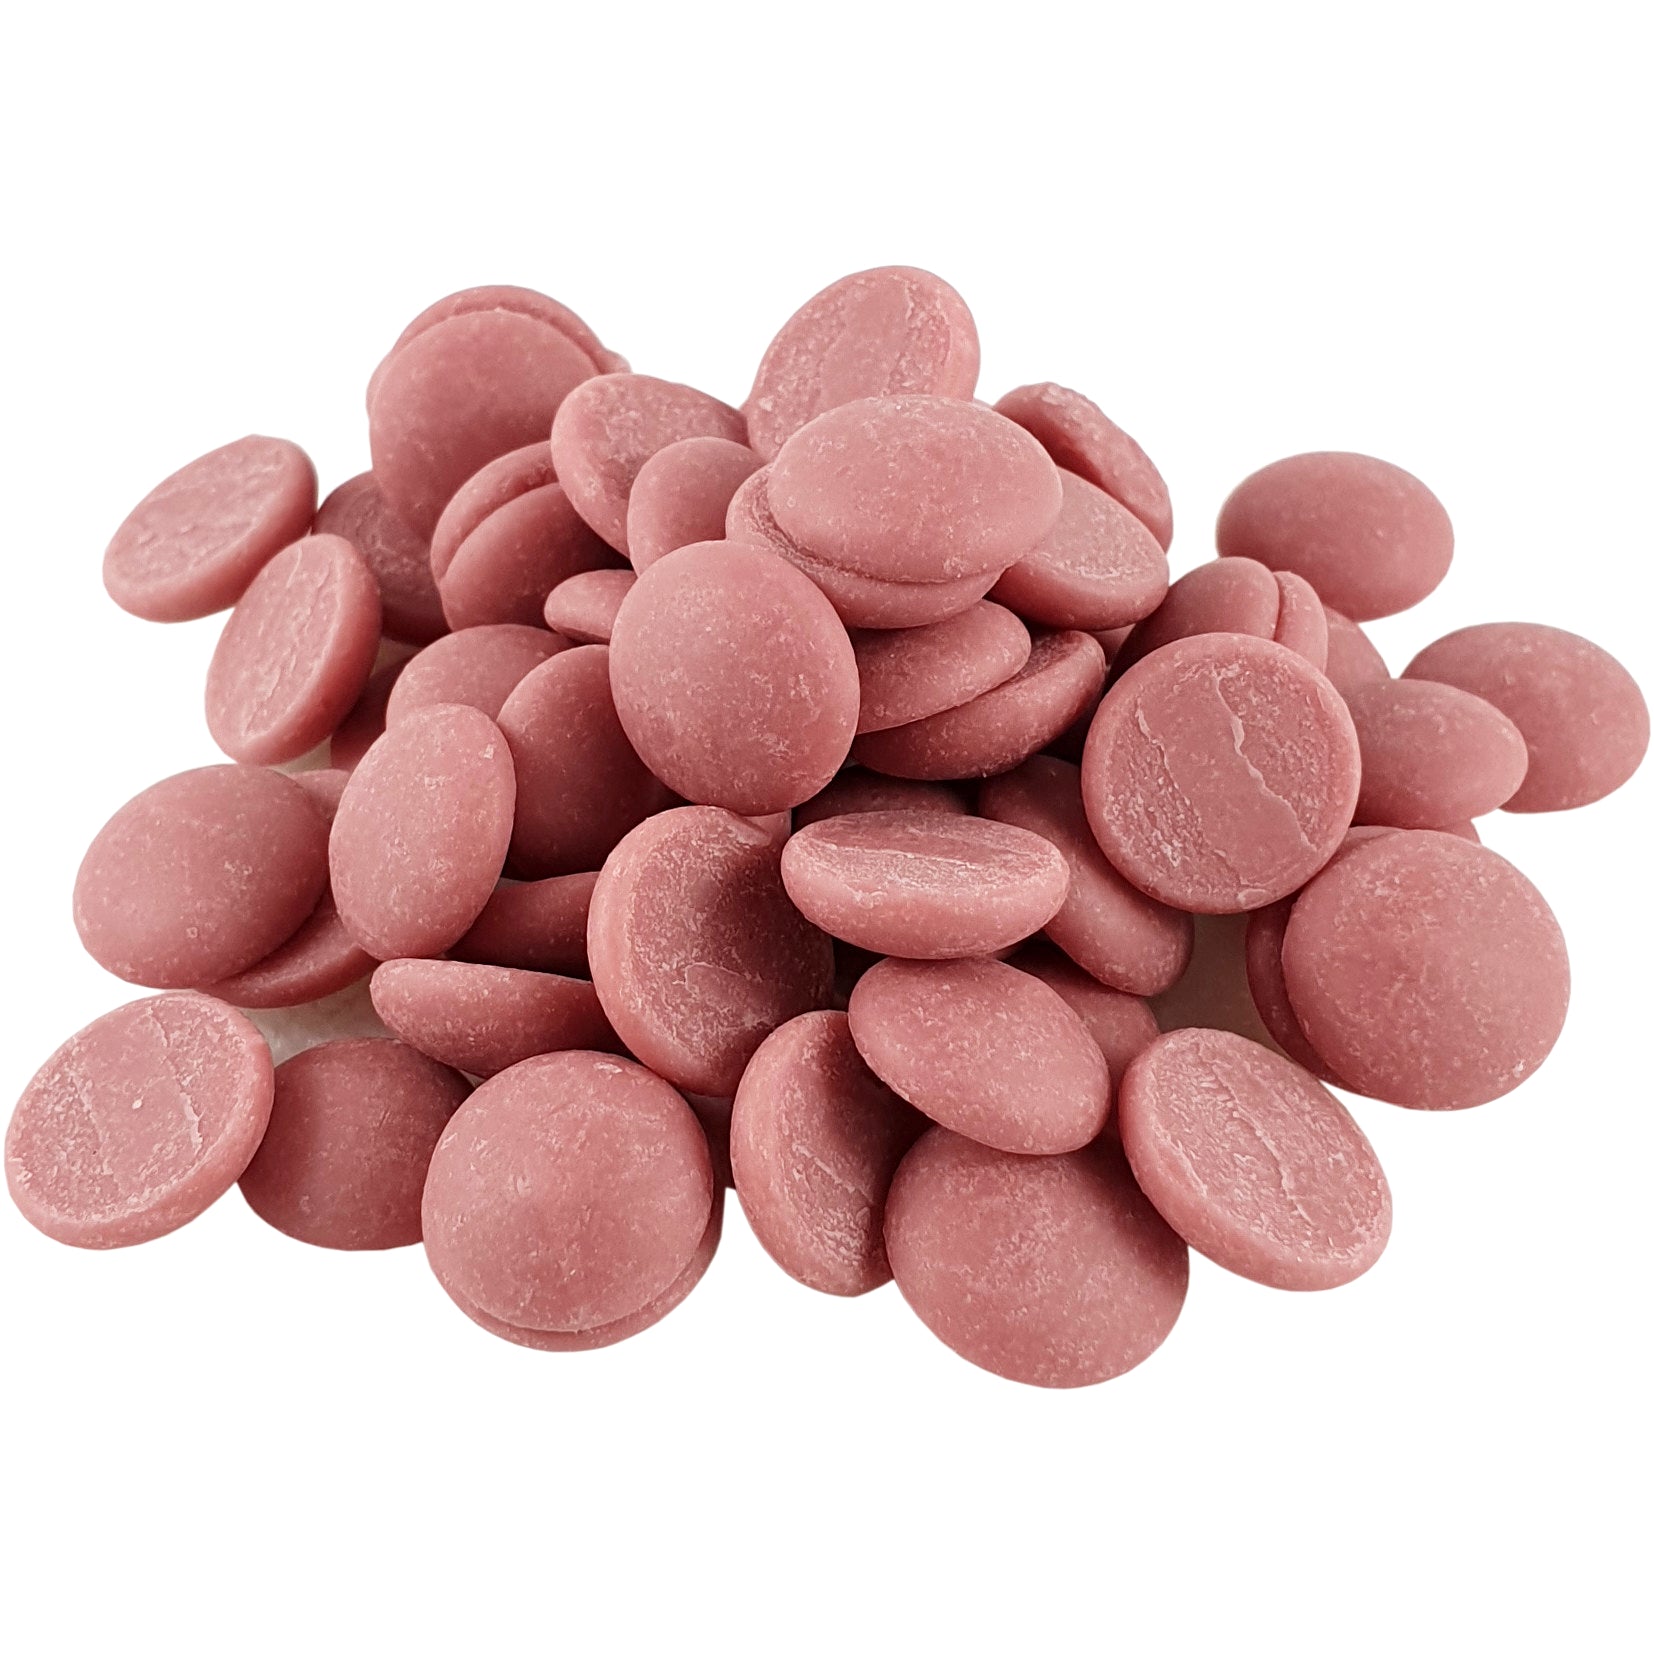 Chocolate Buttons Ruby chocolate - Gluten Free 2kg